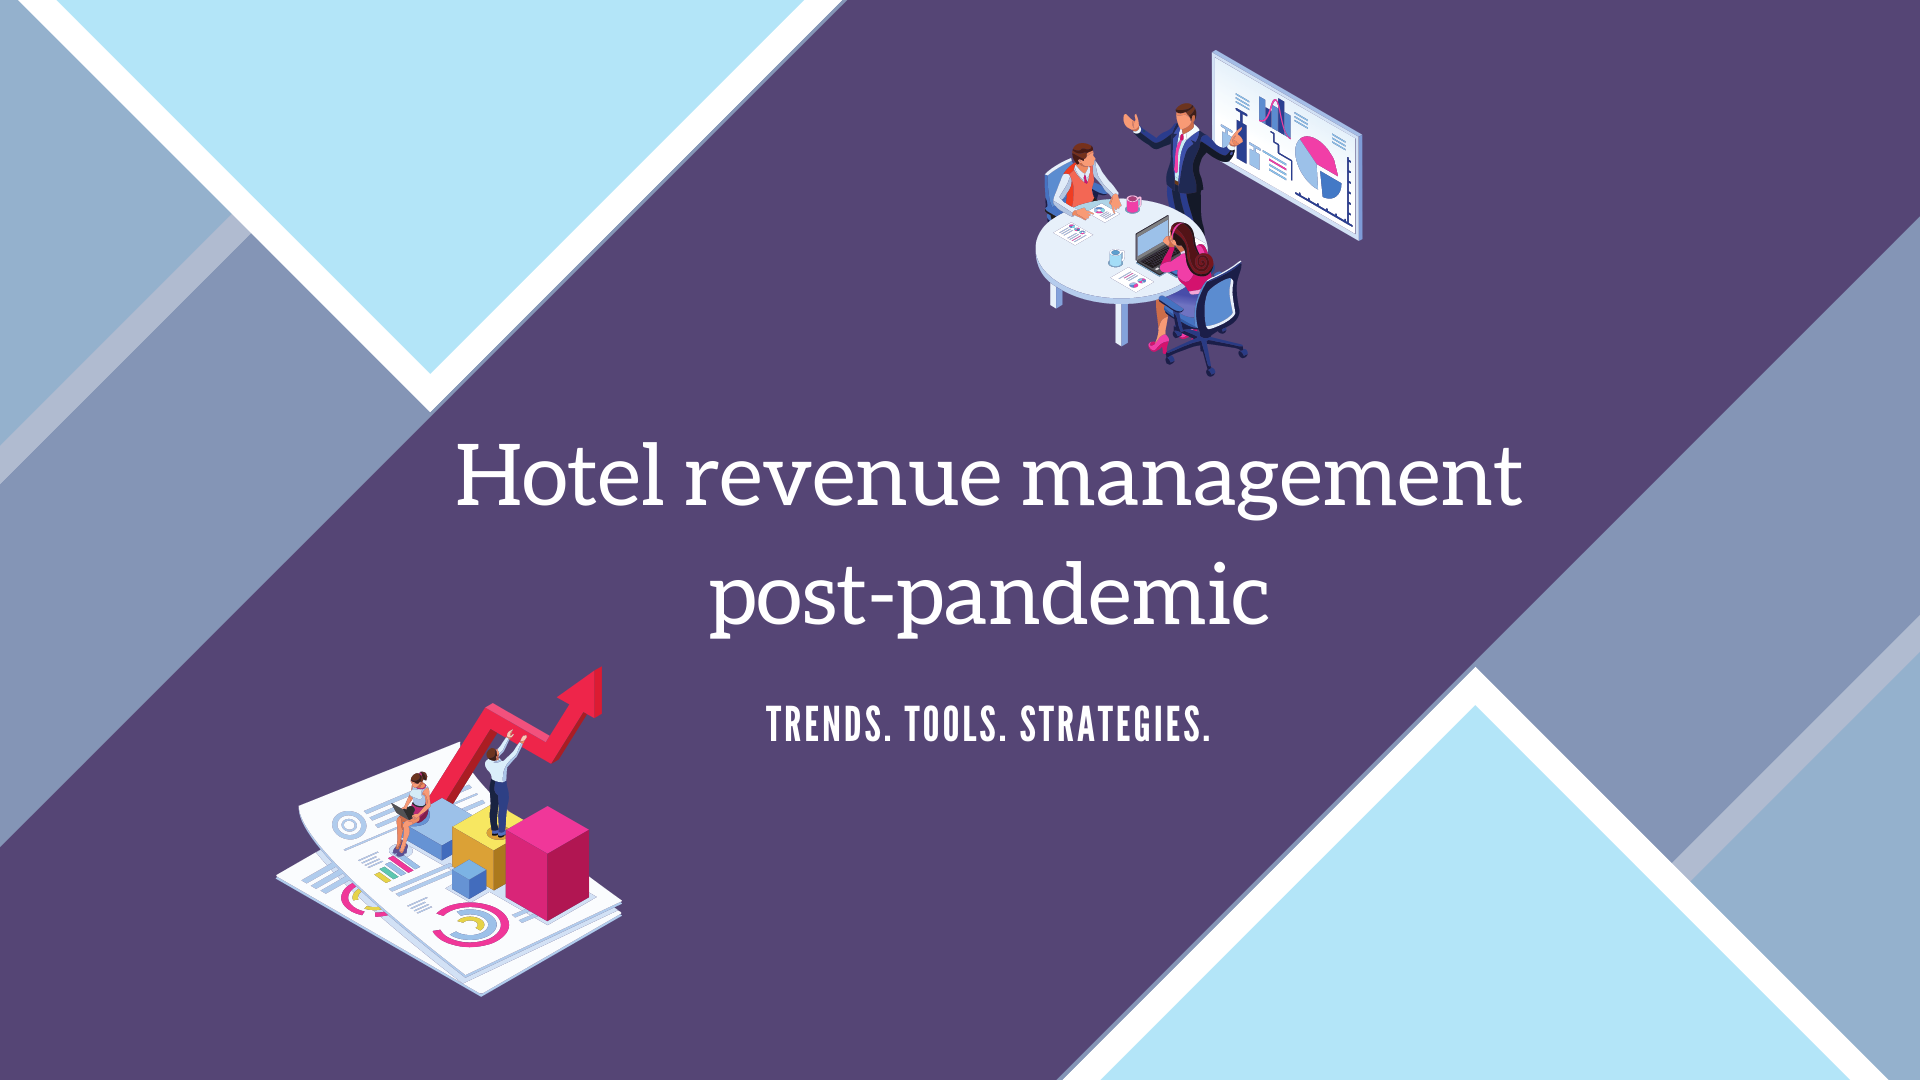 Hotel revenue management post-pandemic: New trends, tools, and strategies